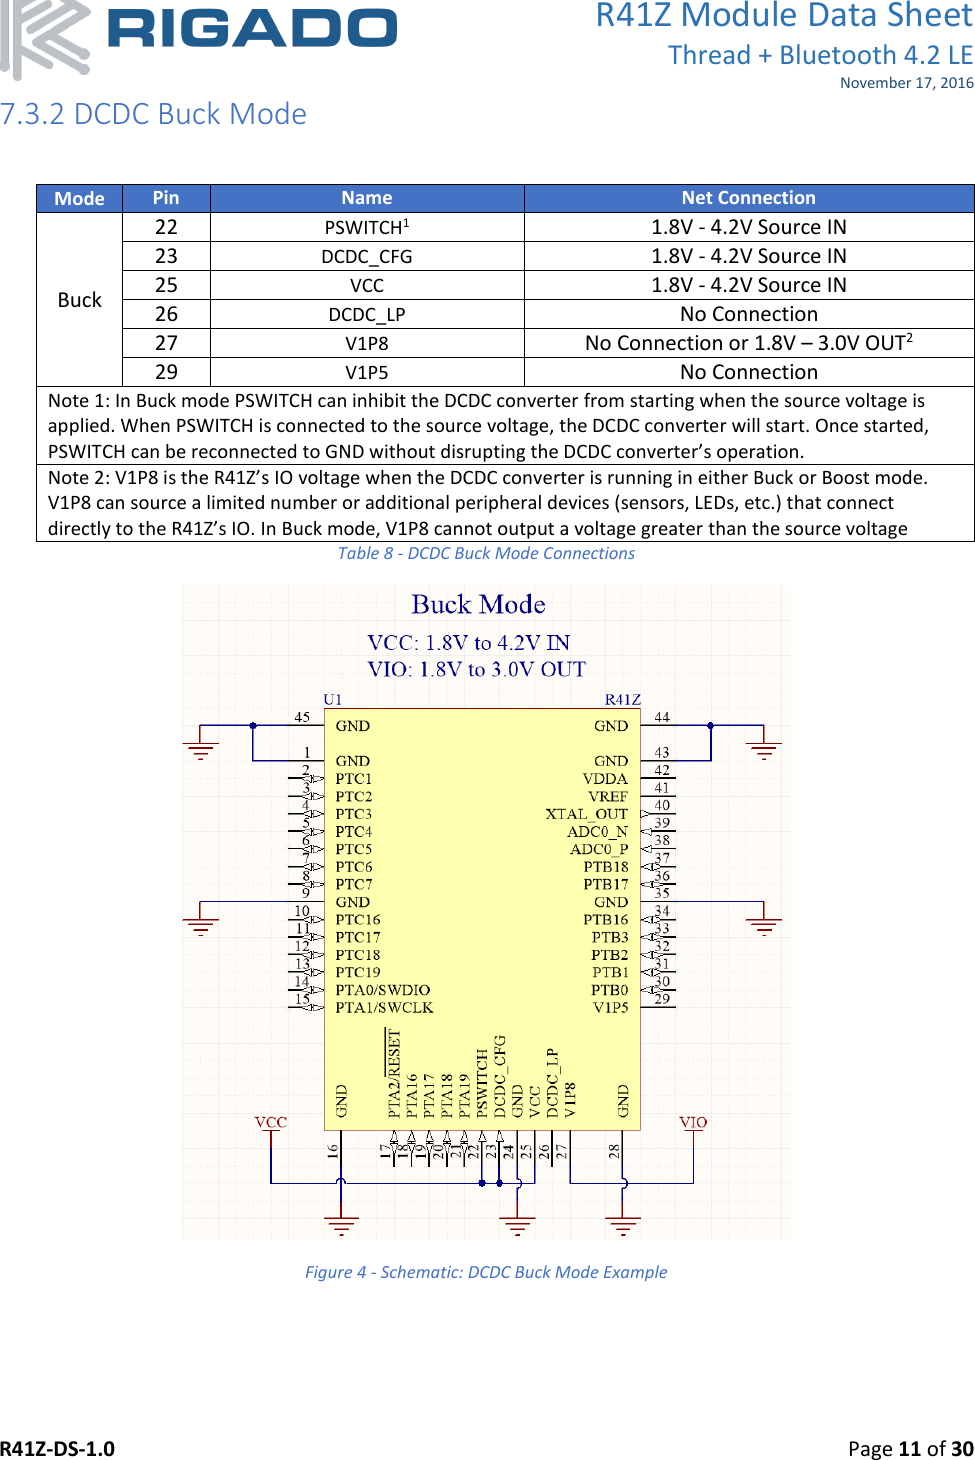 R41Z Module Data Sheet Thread + Bluetooth 4.2 LE November 17, 2016 R41Z-DS-1.0    Page 11 of 30  7.3.2 DCDC Buck Mode  Mode Pin Name Net Connection Buck 22 PSWITCH1 1.8V - 4.2V Source IN 23 DCDC_CFG 1.8V - 4.2V Source IN 25 VCC 1.8V - 4.2V Source IN 26 DCDC_LP No Connection 27 V1P8 No Connection or 1.8V – 3.0V OUT2 29 V1P5 No Connection Note 1: In Buck mode PSWITCH can inhibit the DCDC converter from starting when the source voltage is applied. When PSWITCH is connected to the source voltage, the DCDC converter will start. Once started, PSWITCH can be reconnected to GND without disrupting the DCDC converter’s operation. Note 2: V1P8 is the R41Z’s IO voltage when the DCDC converter is running in either Buck or Boost mode. V1P8 can source a limited number or additional peripheral devices (sensors, LEDs, etc.) that connect directly to the R41Z’s IO. In Buck mode, V1P8 cannot output a voltage greater than the source voltage Table 8 - DCDC Buck Mode Connections  Figure 4 - Schematic: DCDC Buck Mode Example 